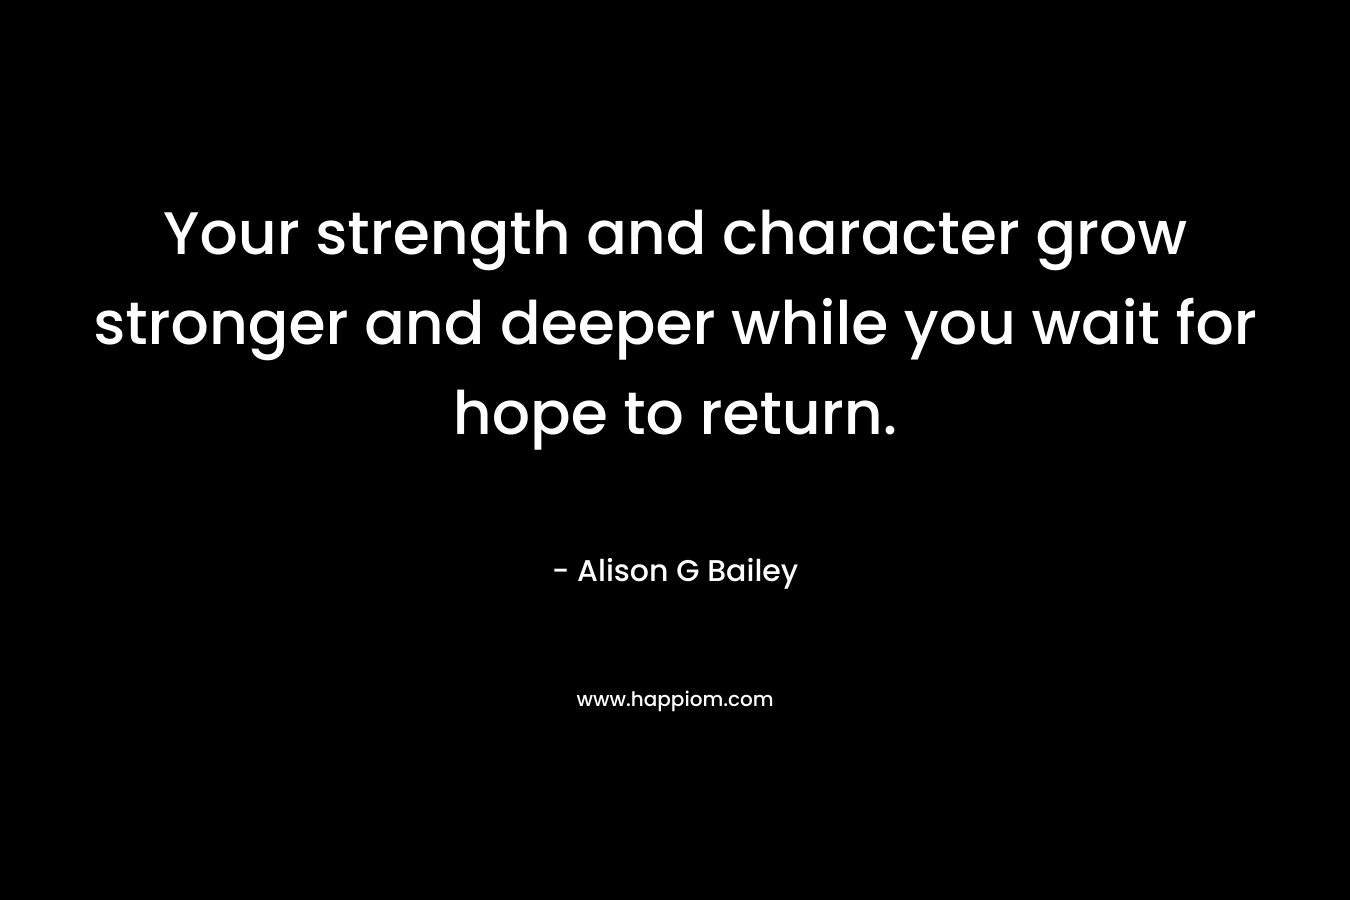 Your strength and character grow stronger and deeper while you wait for hope to return. – Alison G Bailey